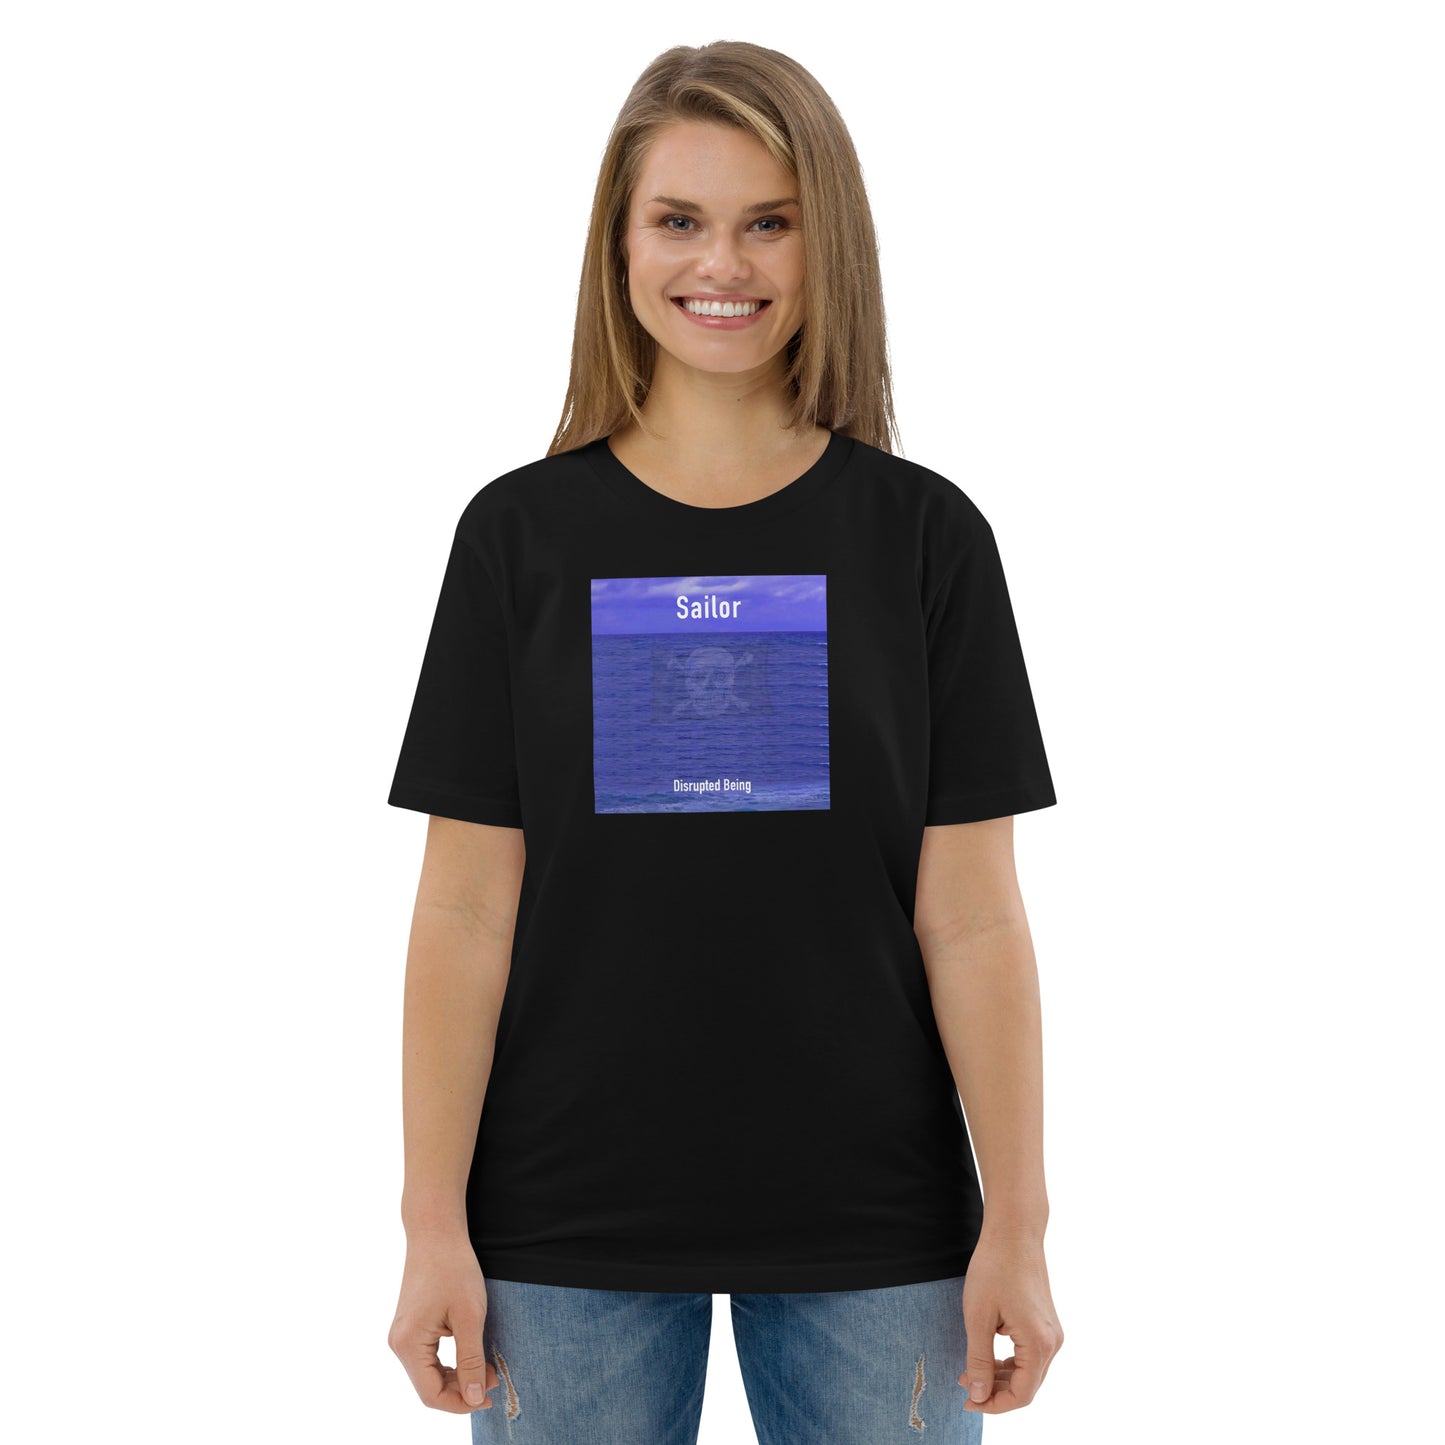 Disrupted Being, Sailor official cover/lyrics, Unisex organic cotton t-shirt